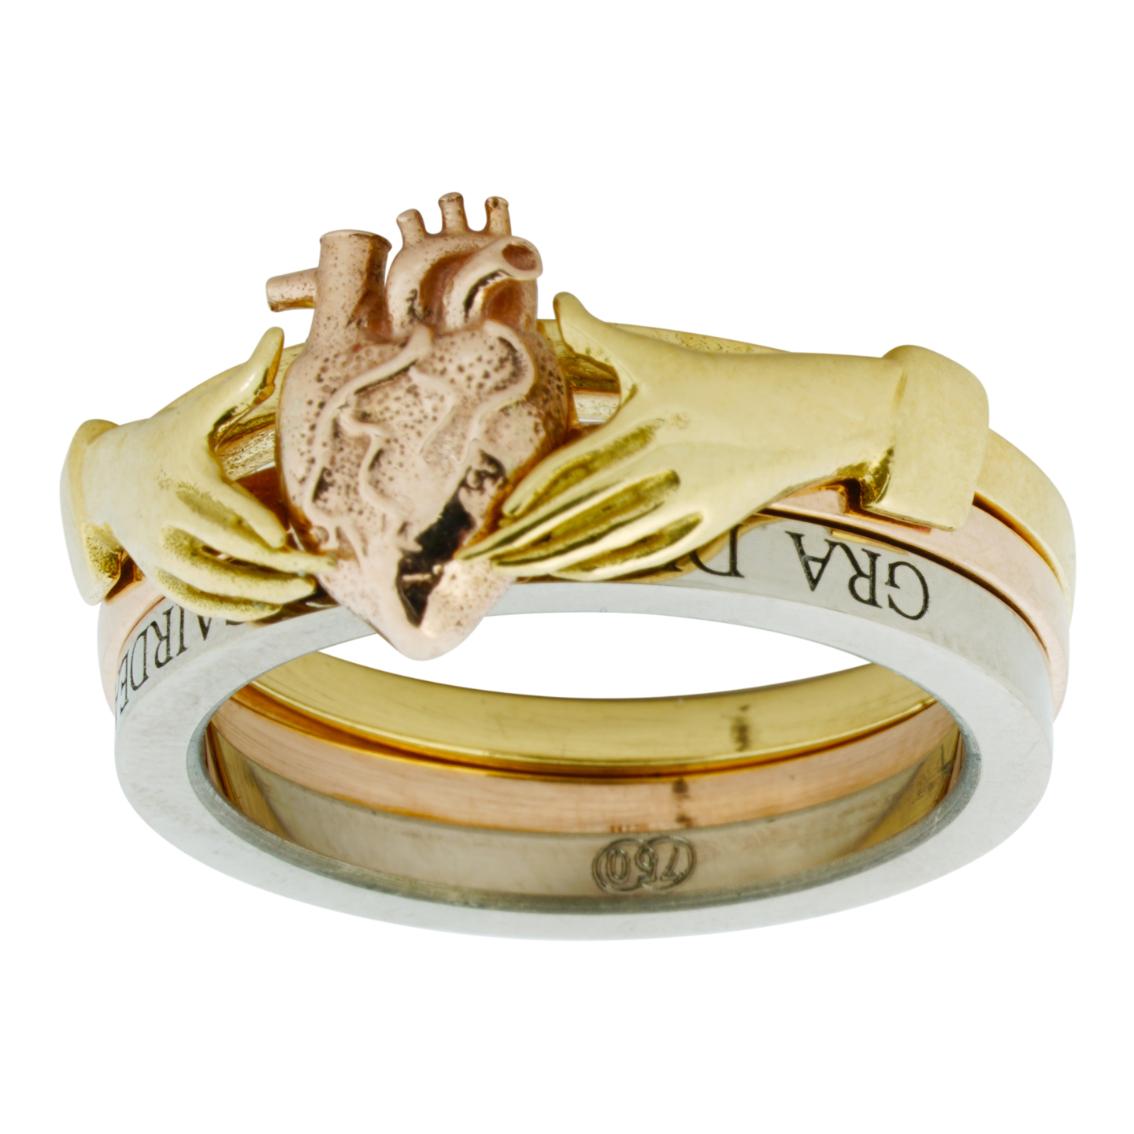 The Anatomical Heart & Claddagh Rings are a stunning set and a charming testament to love.

Exquisitely handcrafted in 18kt yellow, white and rose gold, these three rings can be worn separately or stacked on top of one another. The 18kt white gold